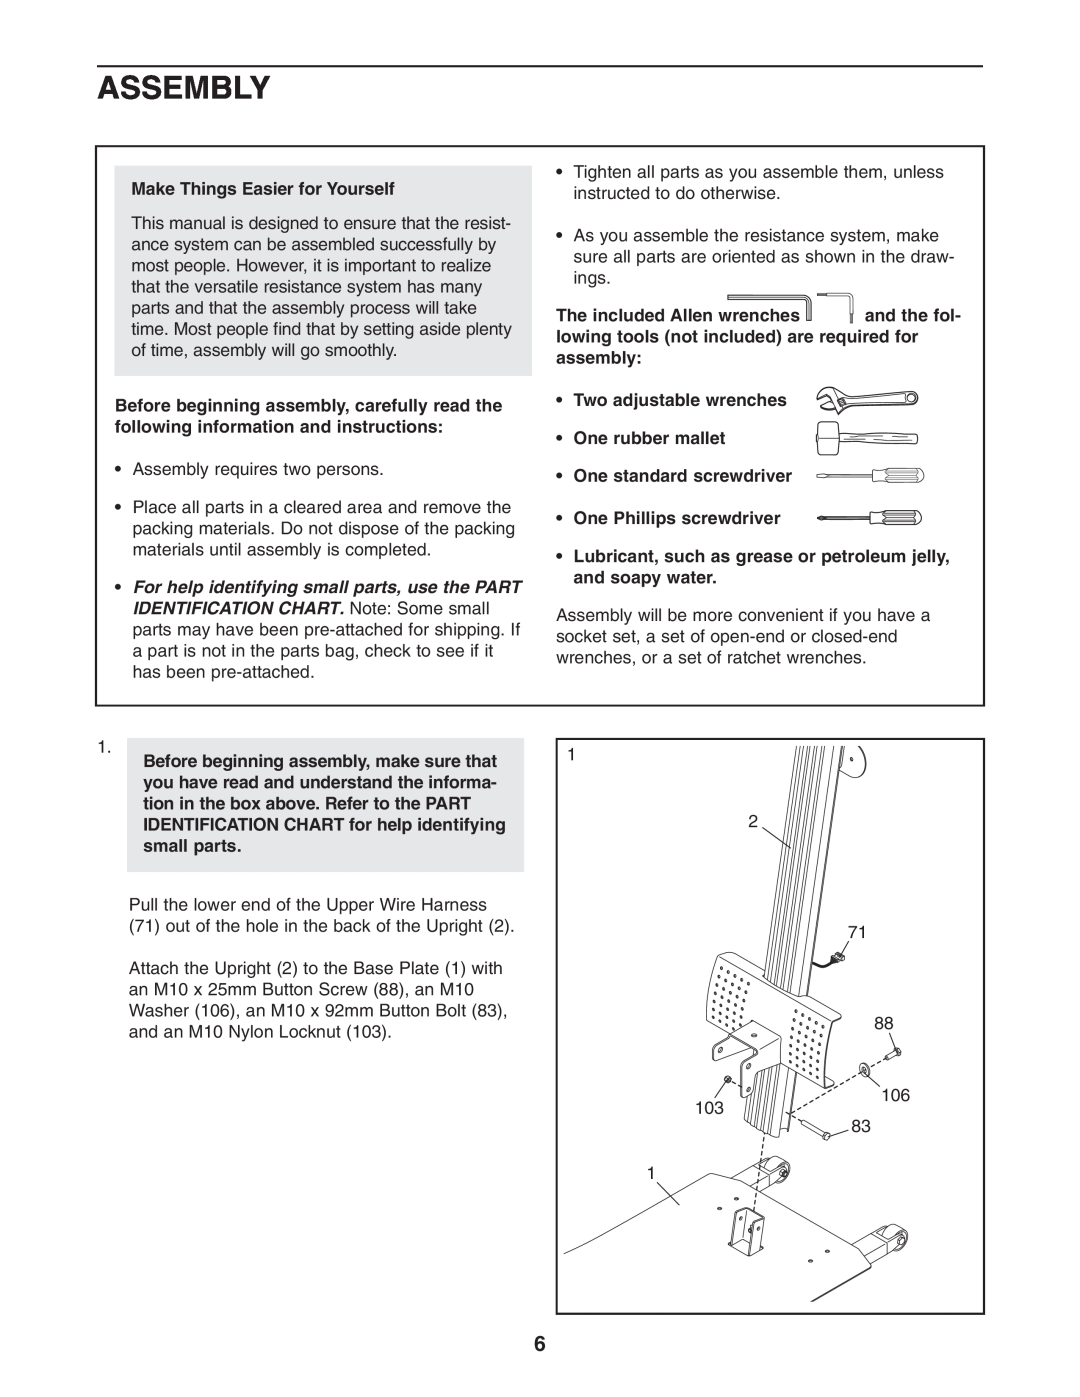 Weider WESY78734 user manual Assembly, Make Things Easier for Yourself, One Phillips screwdriver 